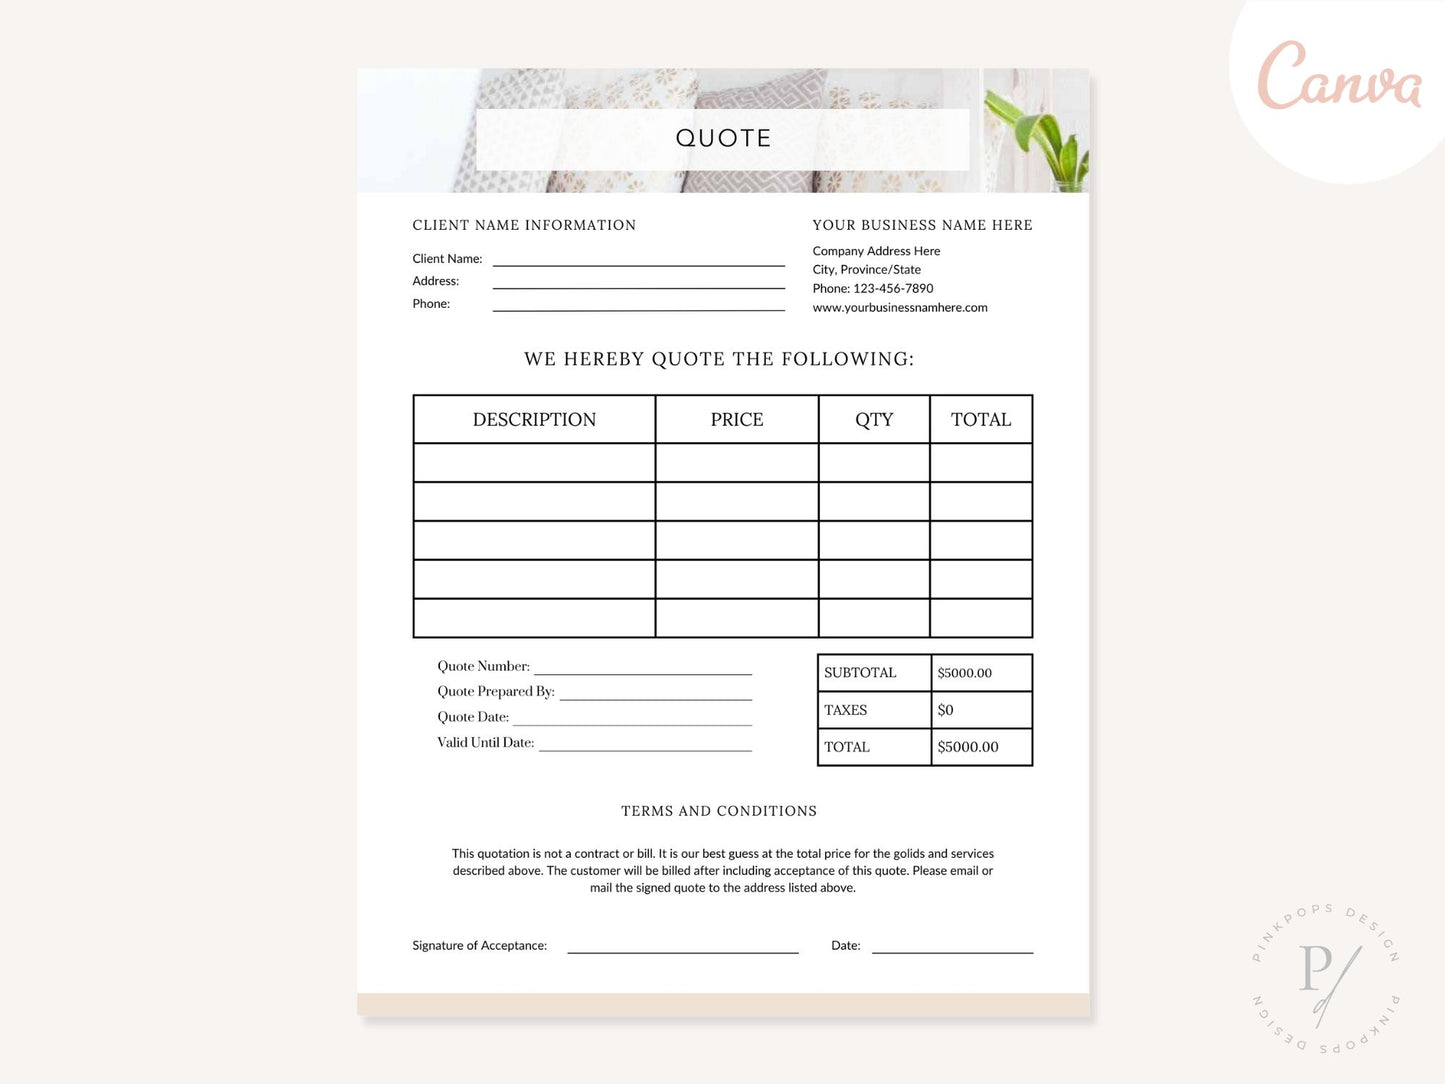 Cleaning Services Quotation - Editable template for presenting professional cleaning service quotes, streamlining the quotation process, ensuring accuracy and organization for quotes in the cleaning business.